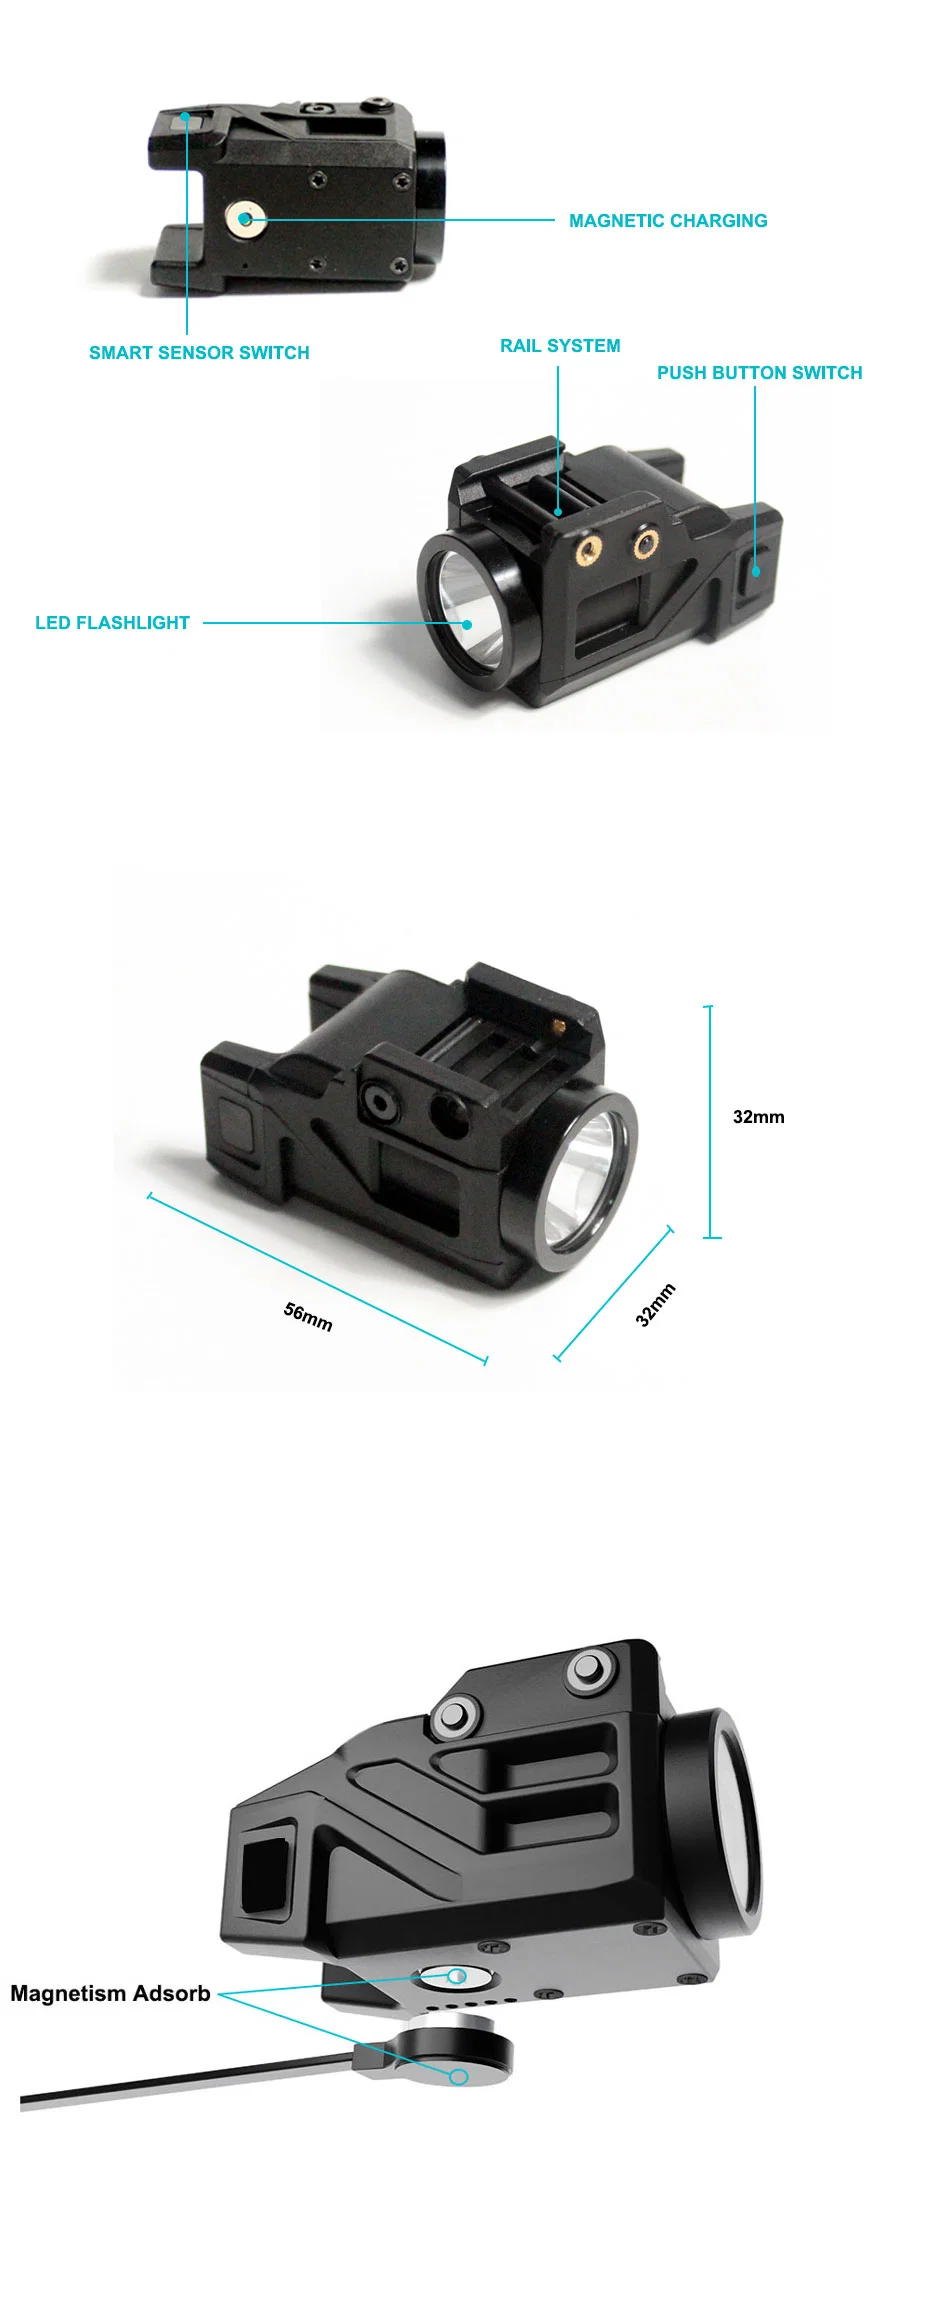 2021 New Magnetic Rechargeable Intelligent Smart Sensor Switch High 600 Lumens Pistol Weapon LED Light for Self Defense and Hunting